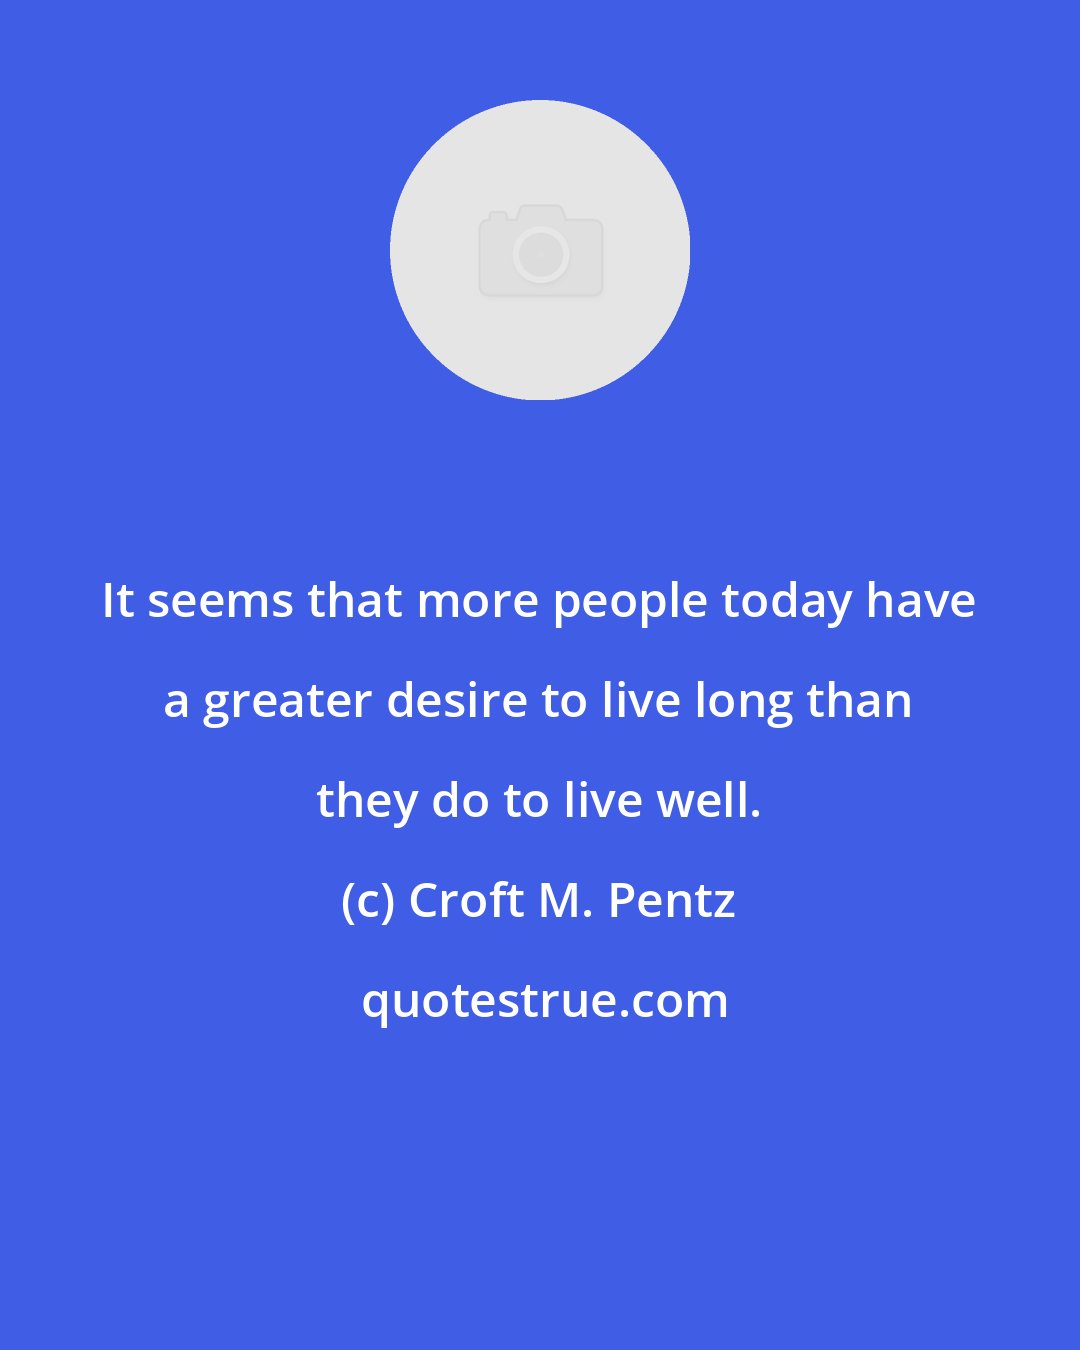 Croft M. Pentz: It seems that more people today have a greater desire to live long than they do to live well.